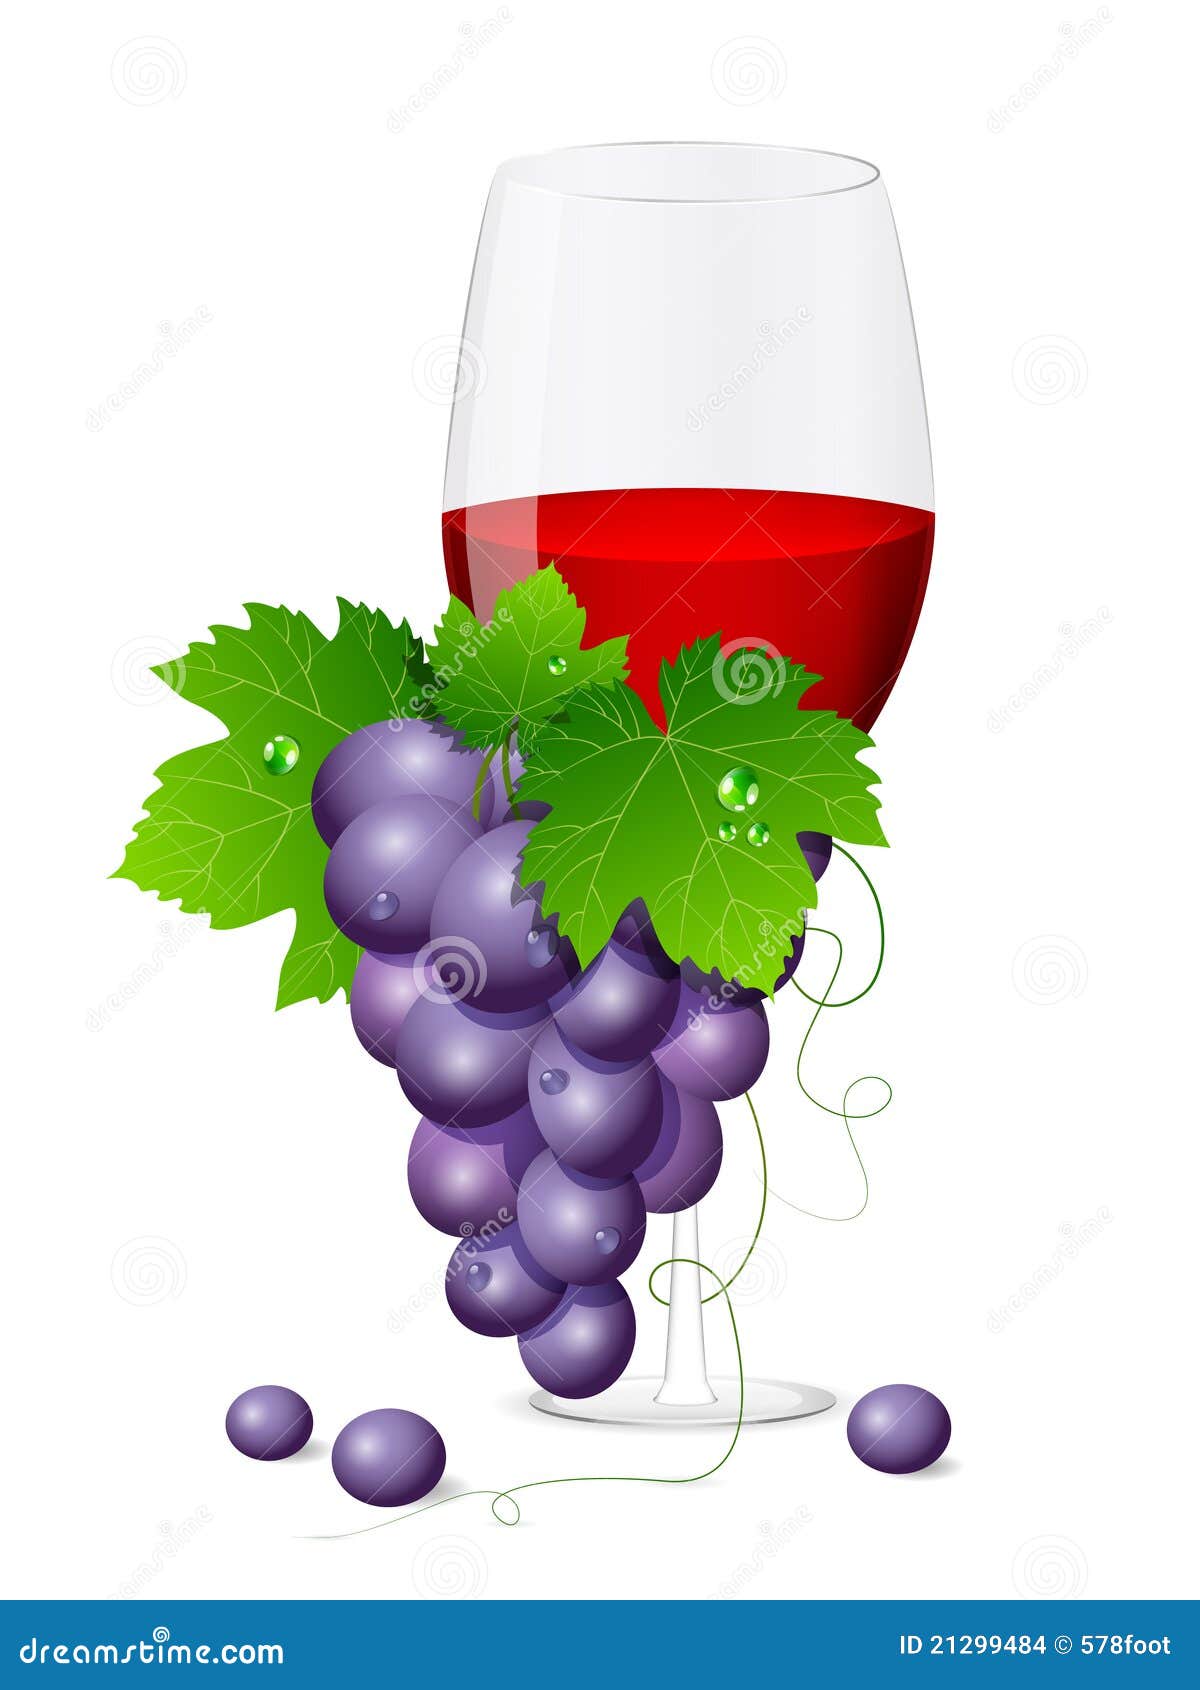 Grapes stock vector. Illustration of natural, decoration - 21299484